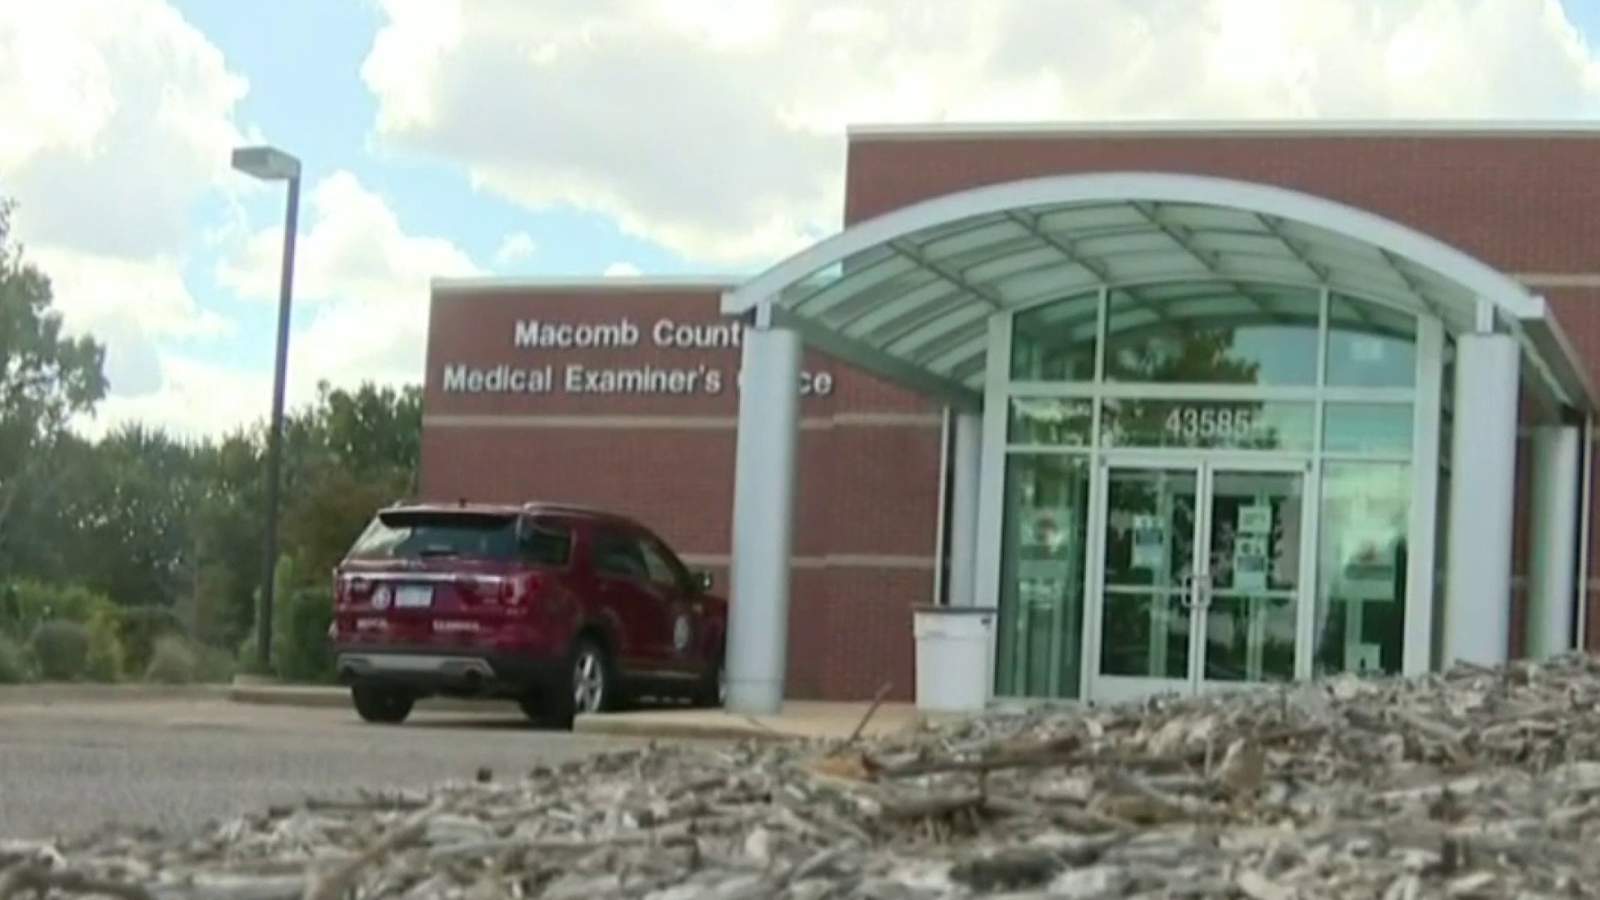 Allegations of sexual misconduct and racism at Macomb County Medical Examiners Office under investigation